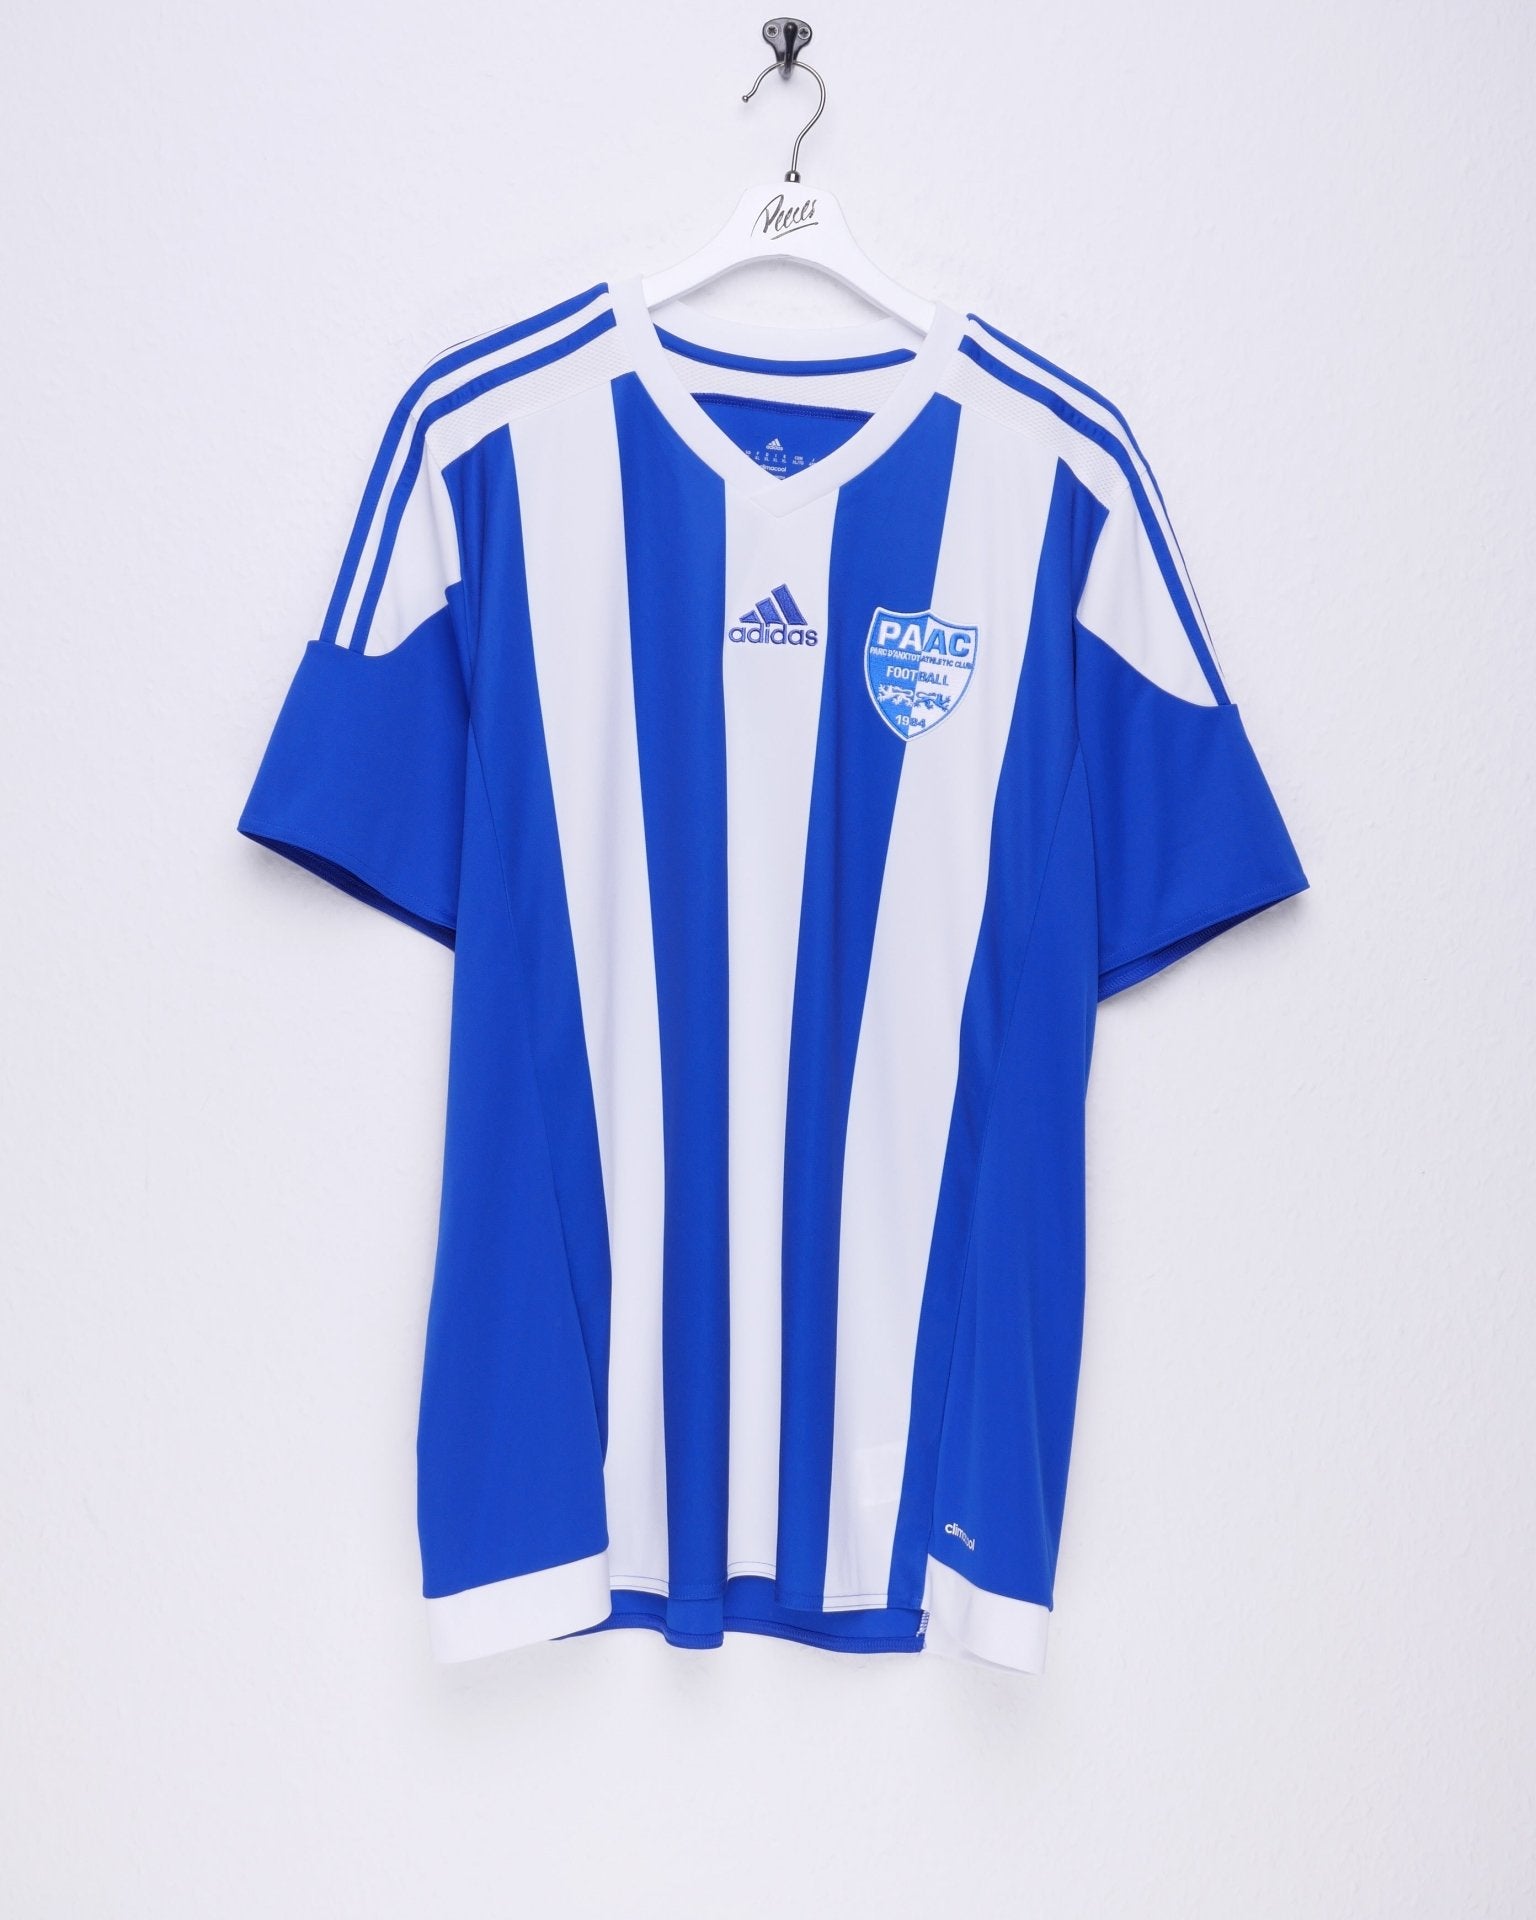 adidas embroidered Middle Logo striped Soccer Jersey Shirt - Peeces